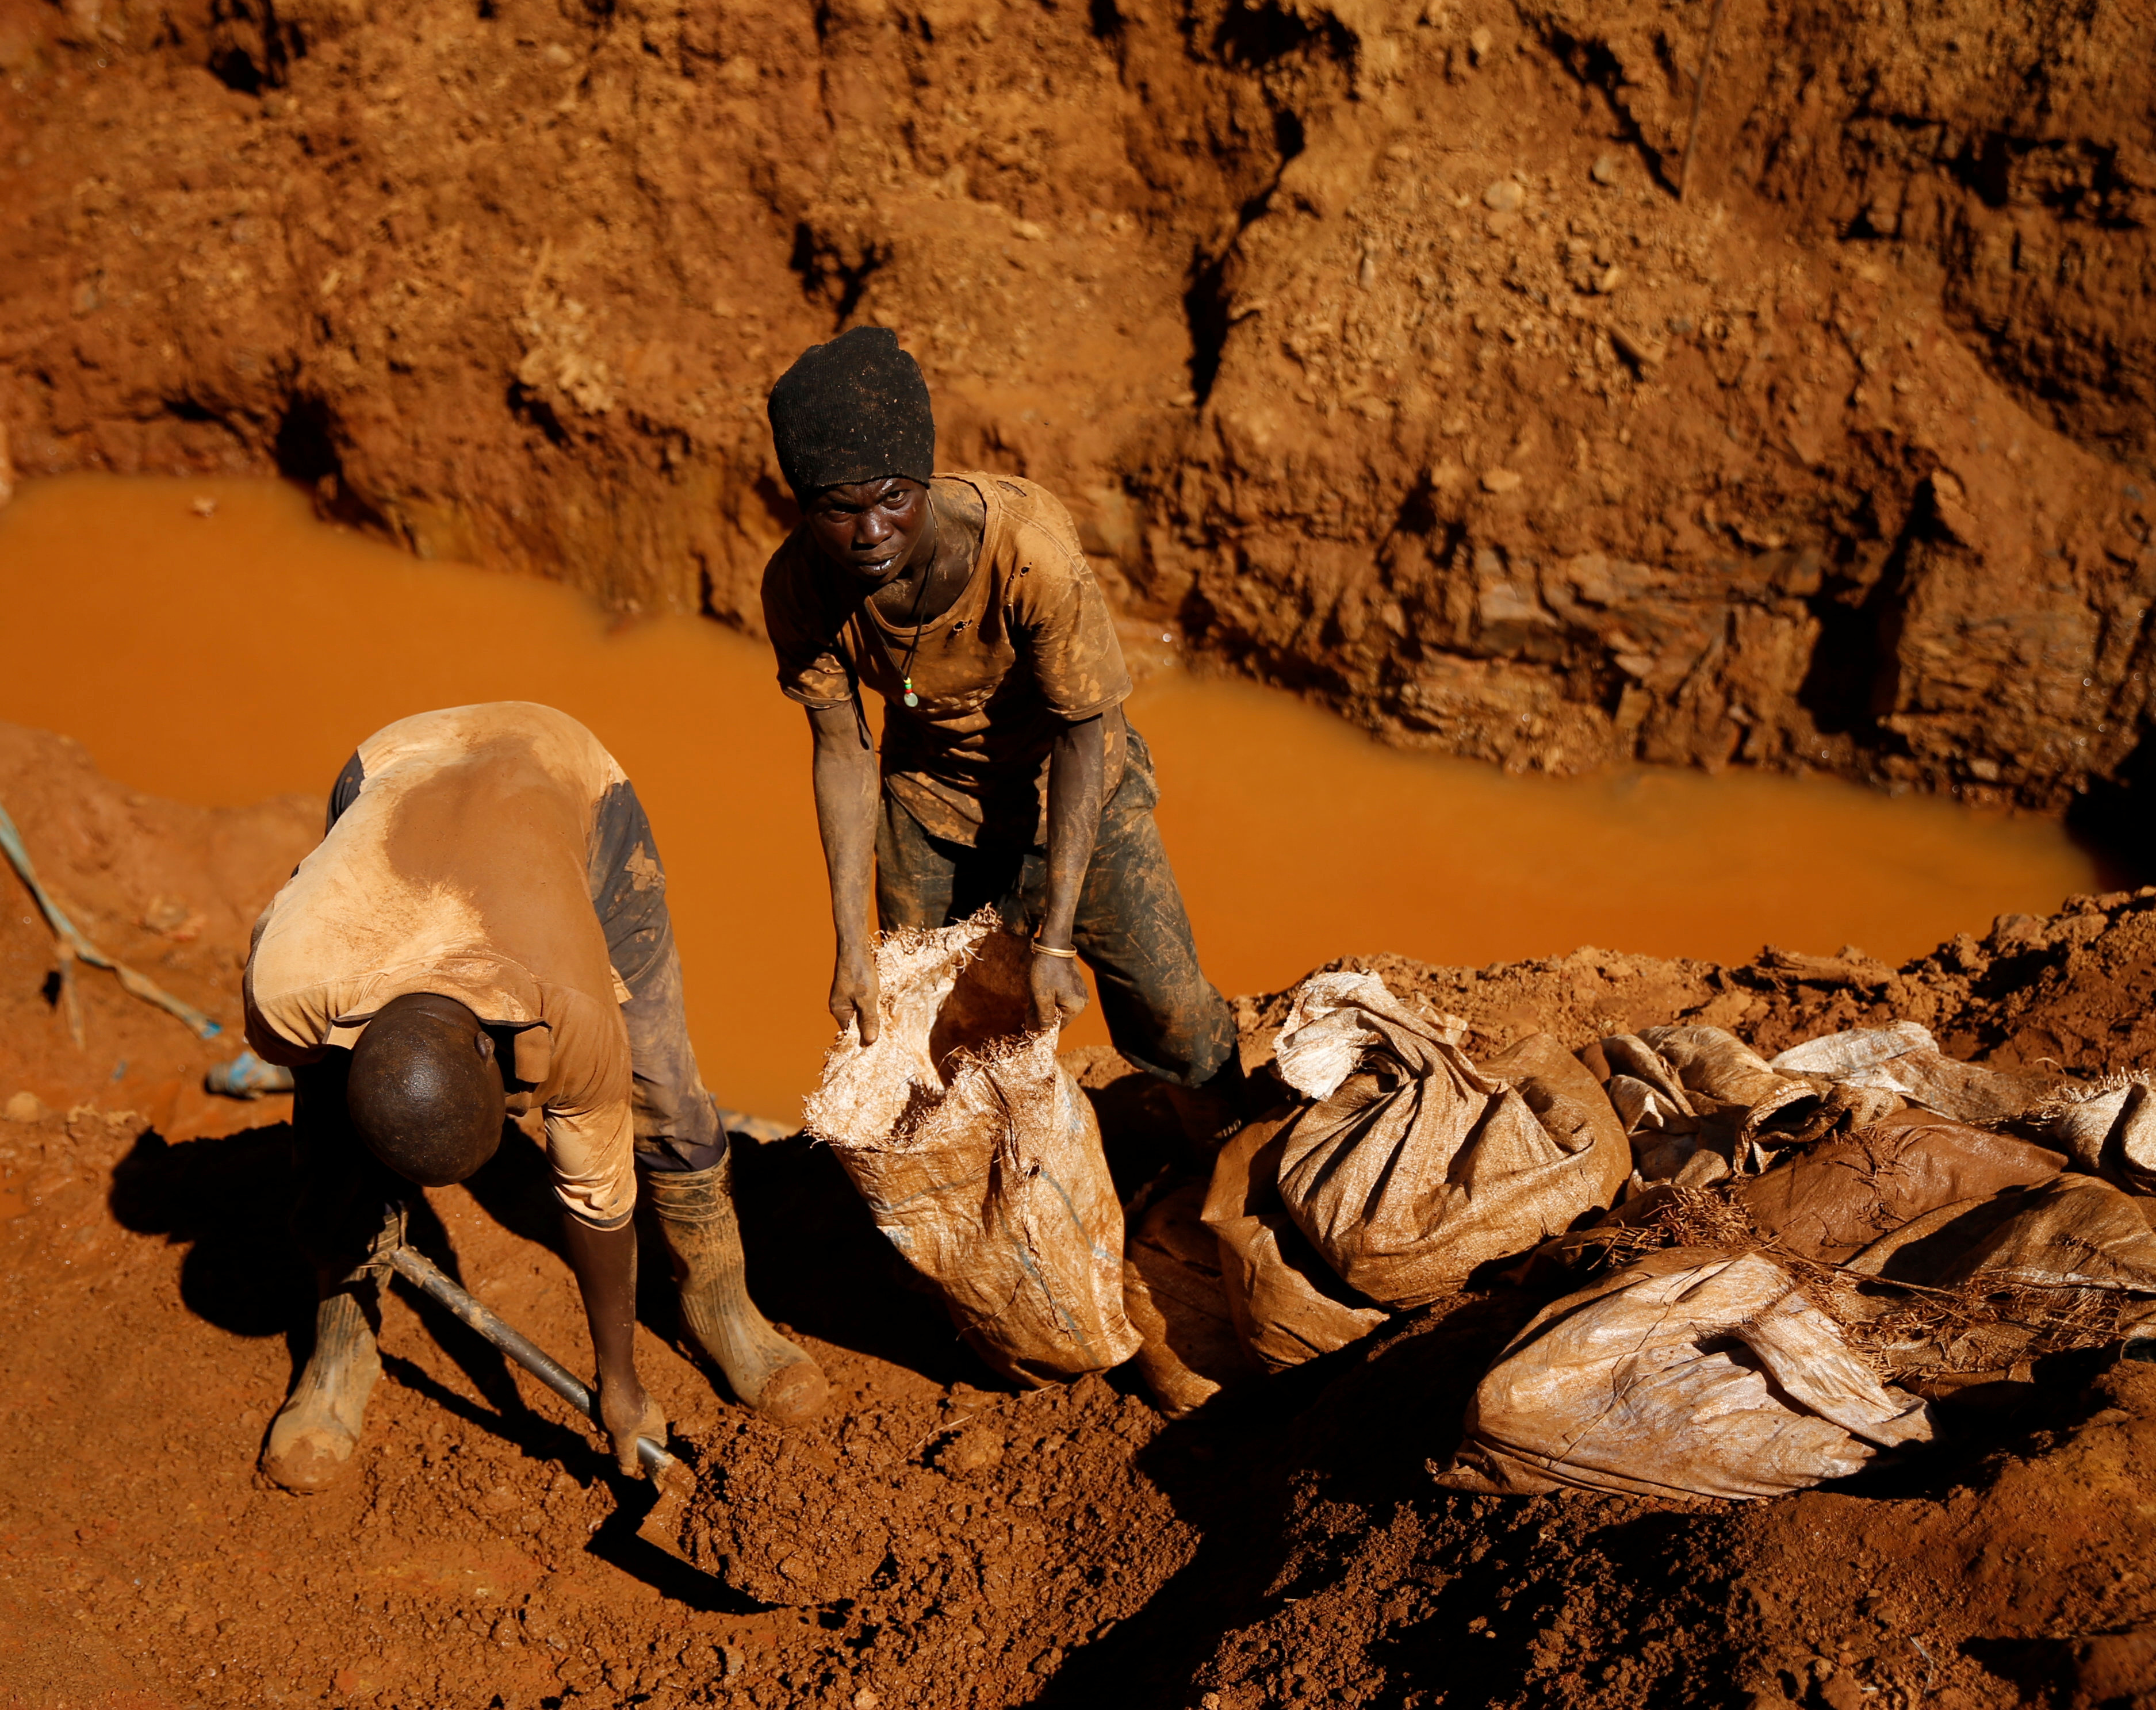 Illegal artisanal gold miners work at an open mine after occupying parts of Smithfield farm, owned by the former President Robert Mugabe's wife Grace Mugabe, in Mazowe